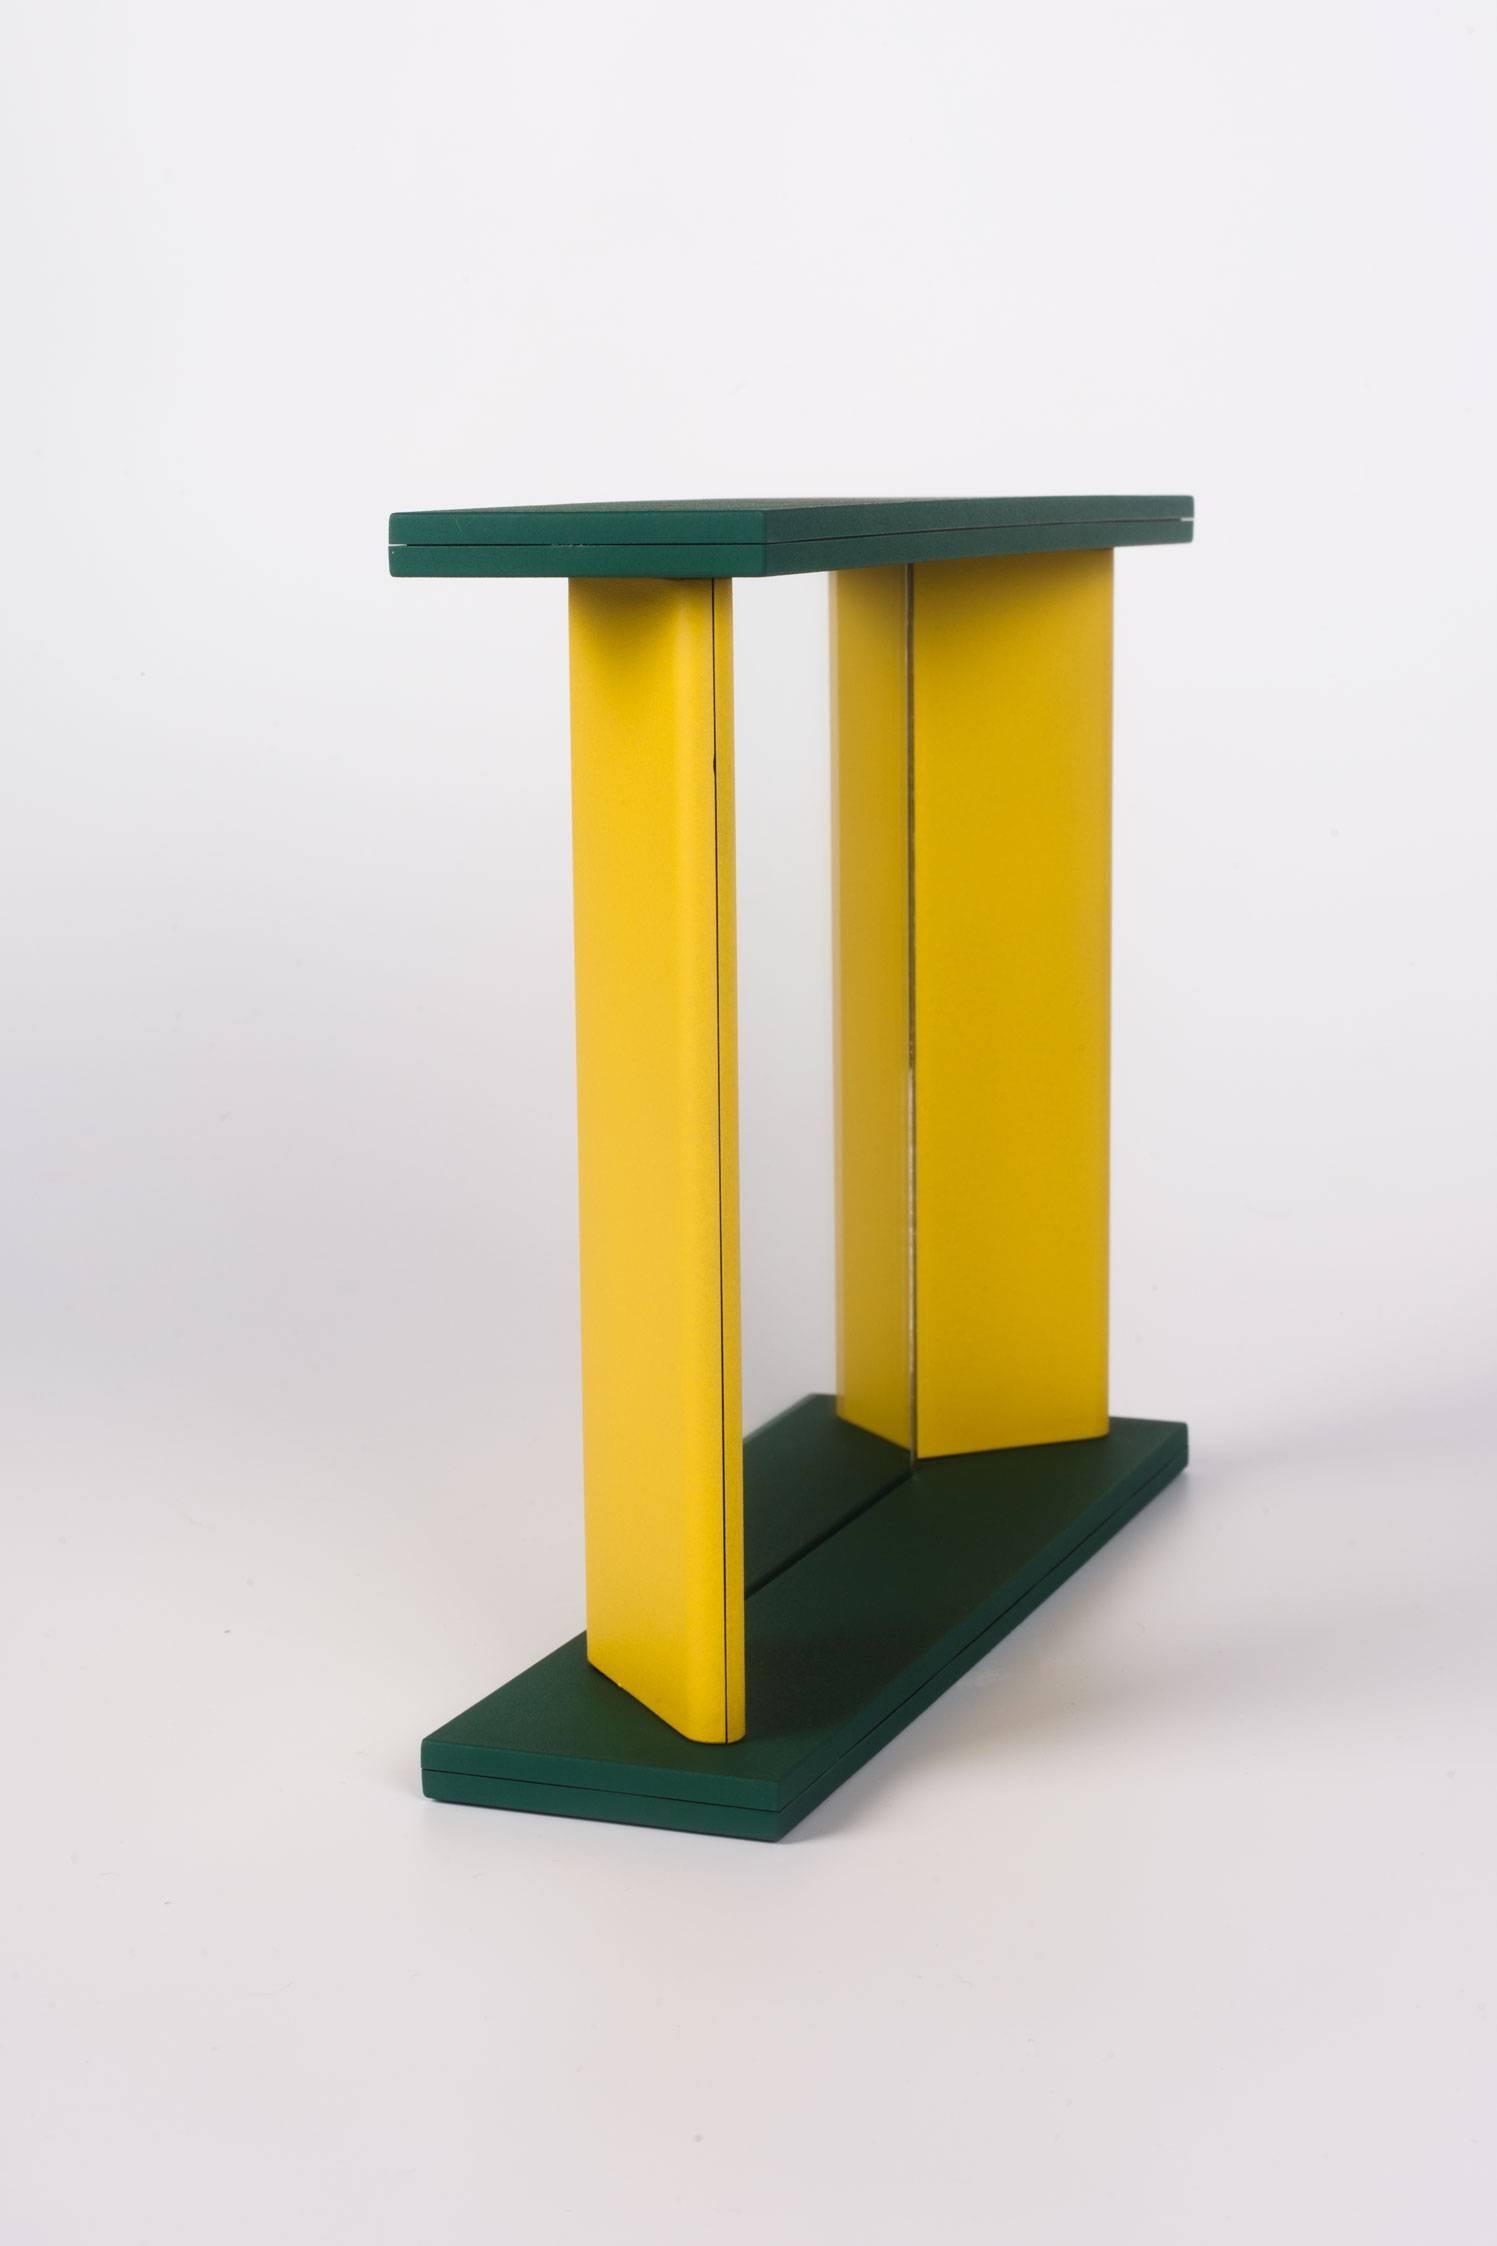 Memphis Green Yellow Table Mirror by Marco Zannini, 1990s (Japanisch)